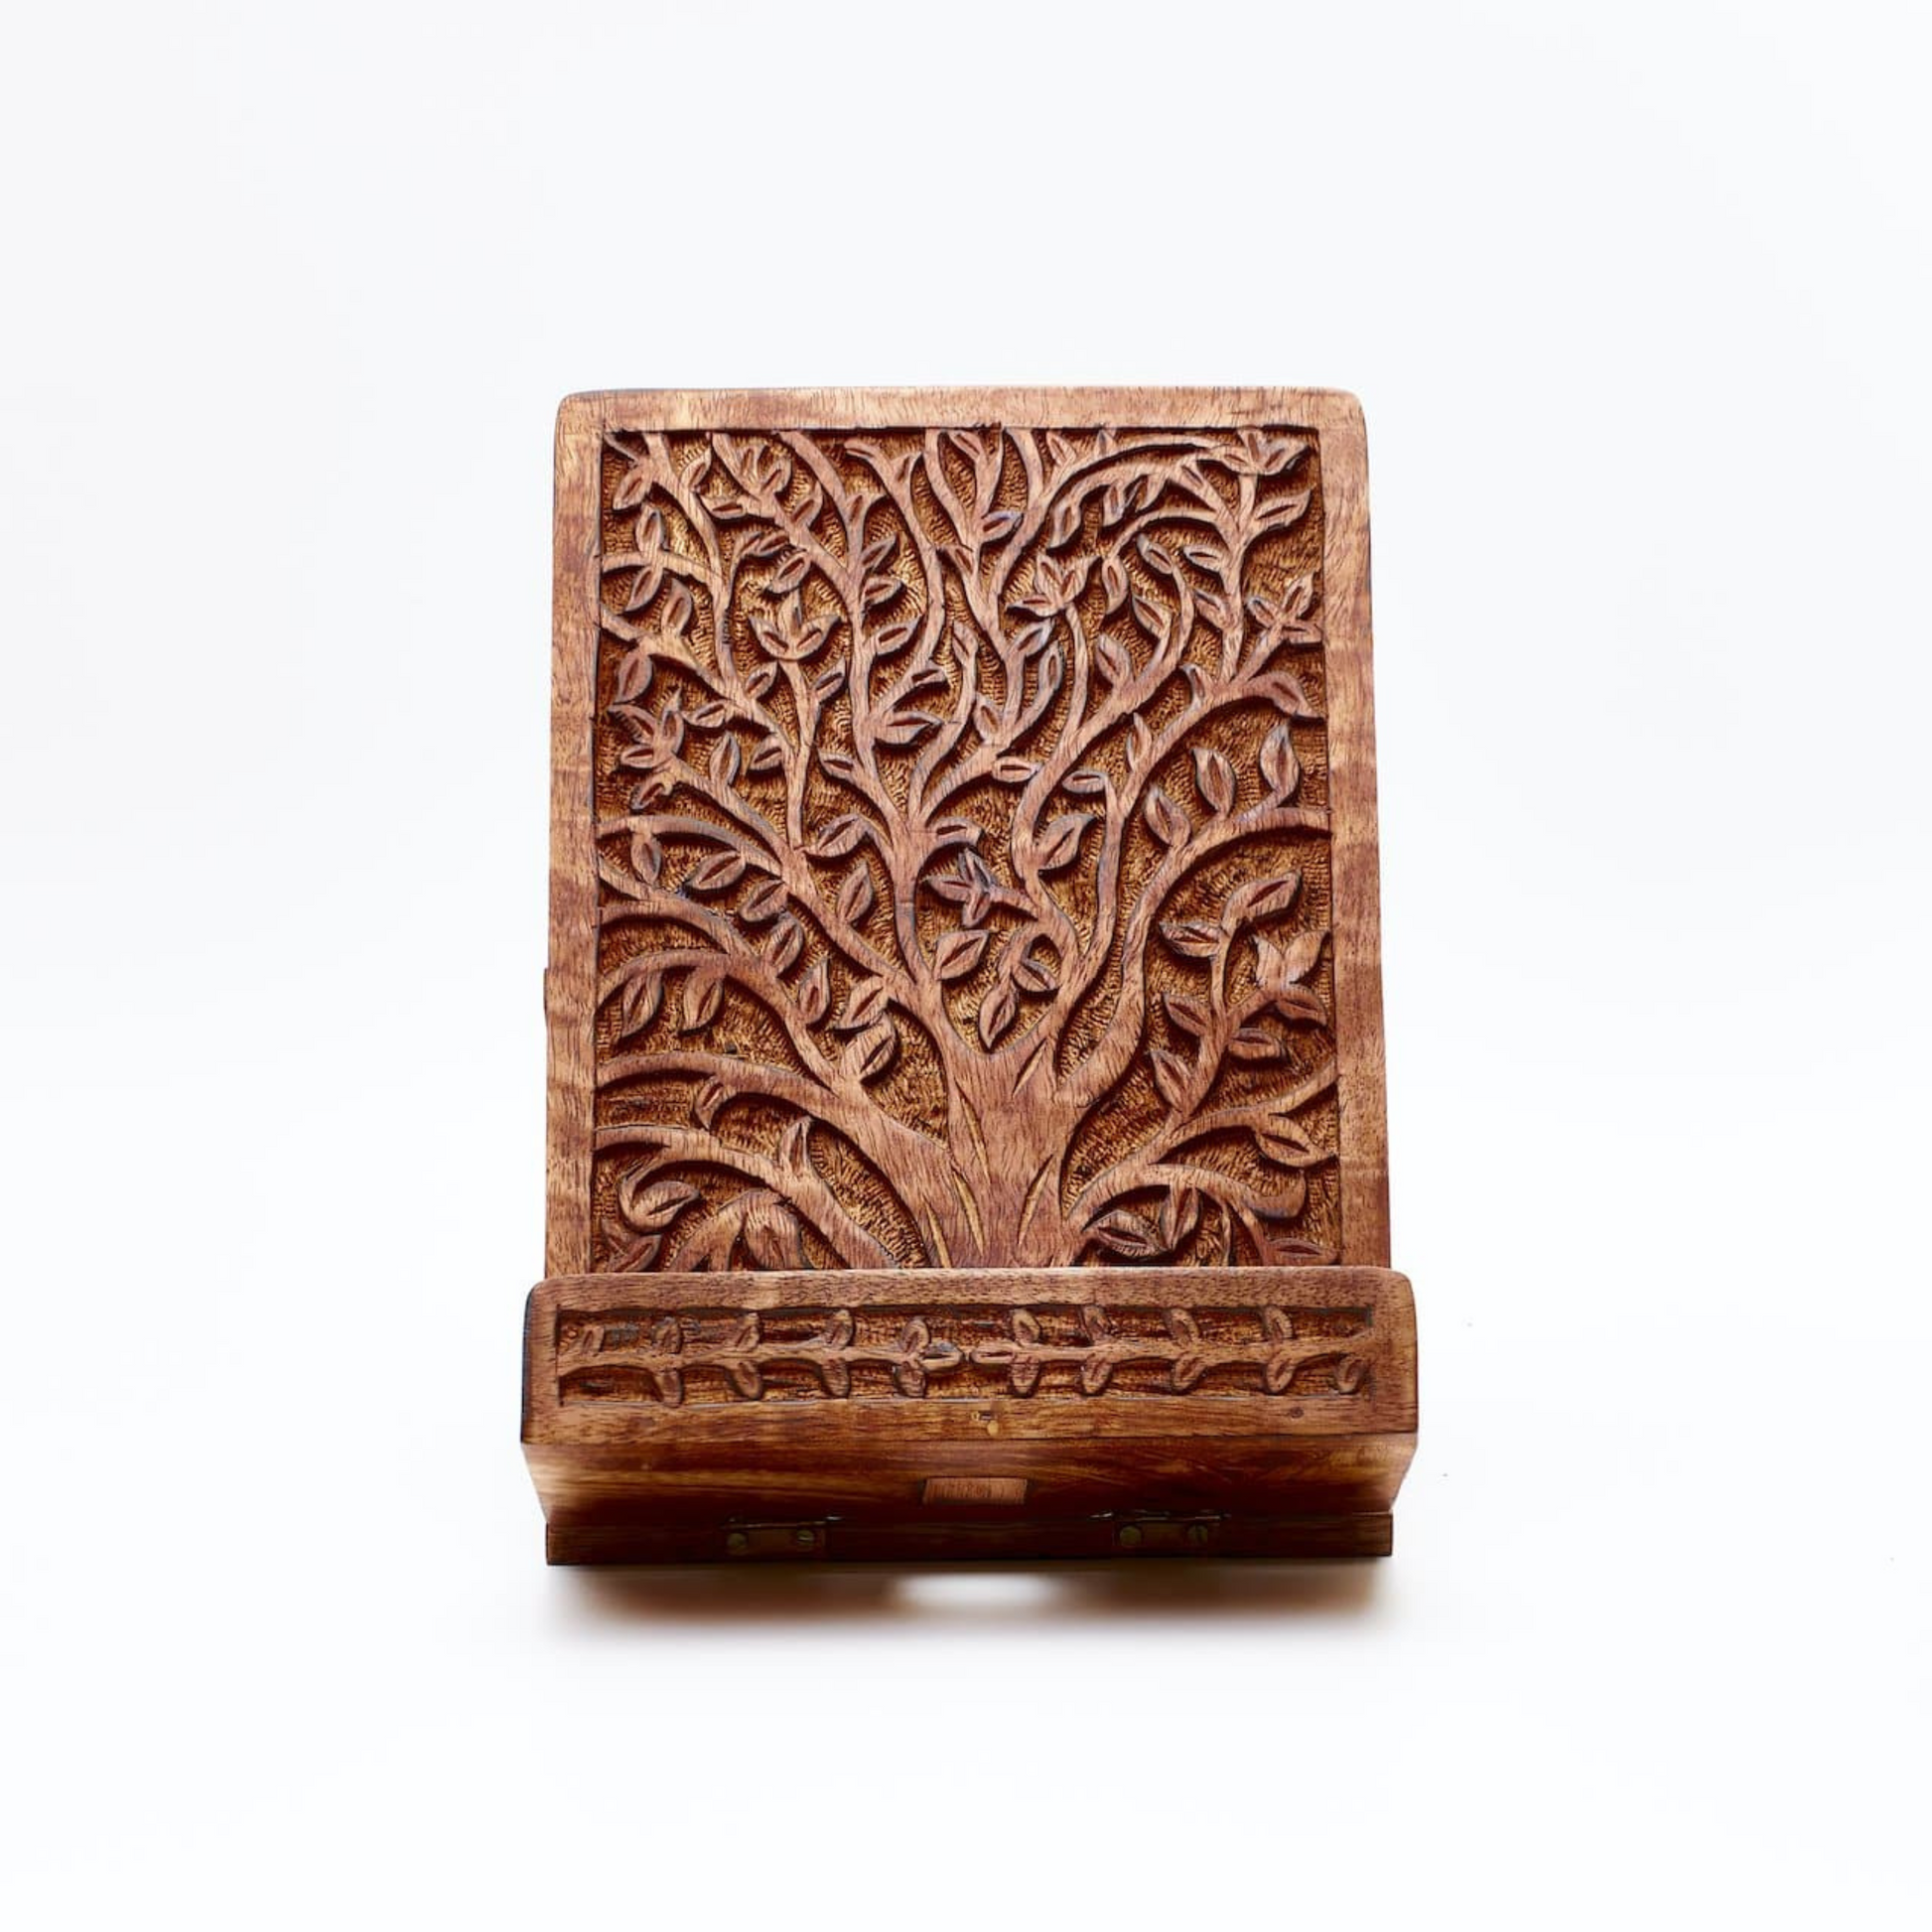 Tree of Life Tablet and Book Adjustable Stand - Collapsible, Engraved, Kitchen Holder - Aksa Home Decor 